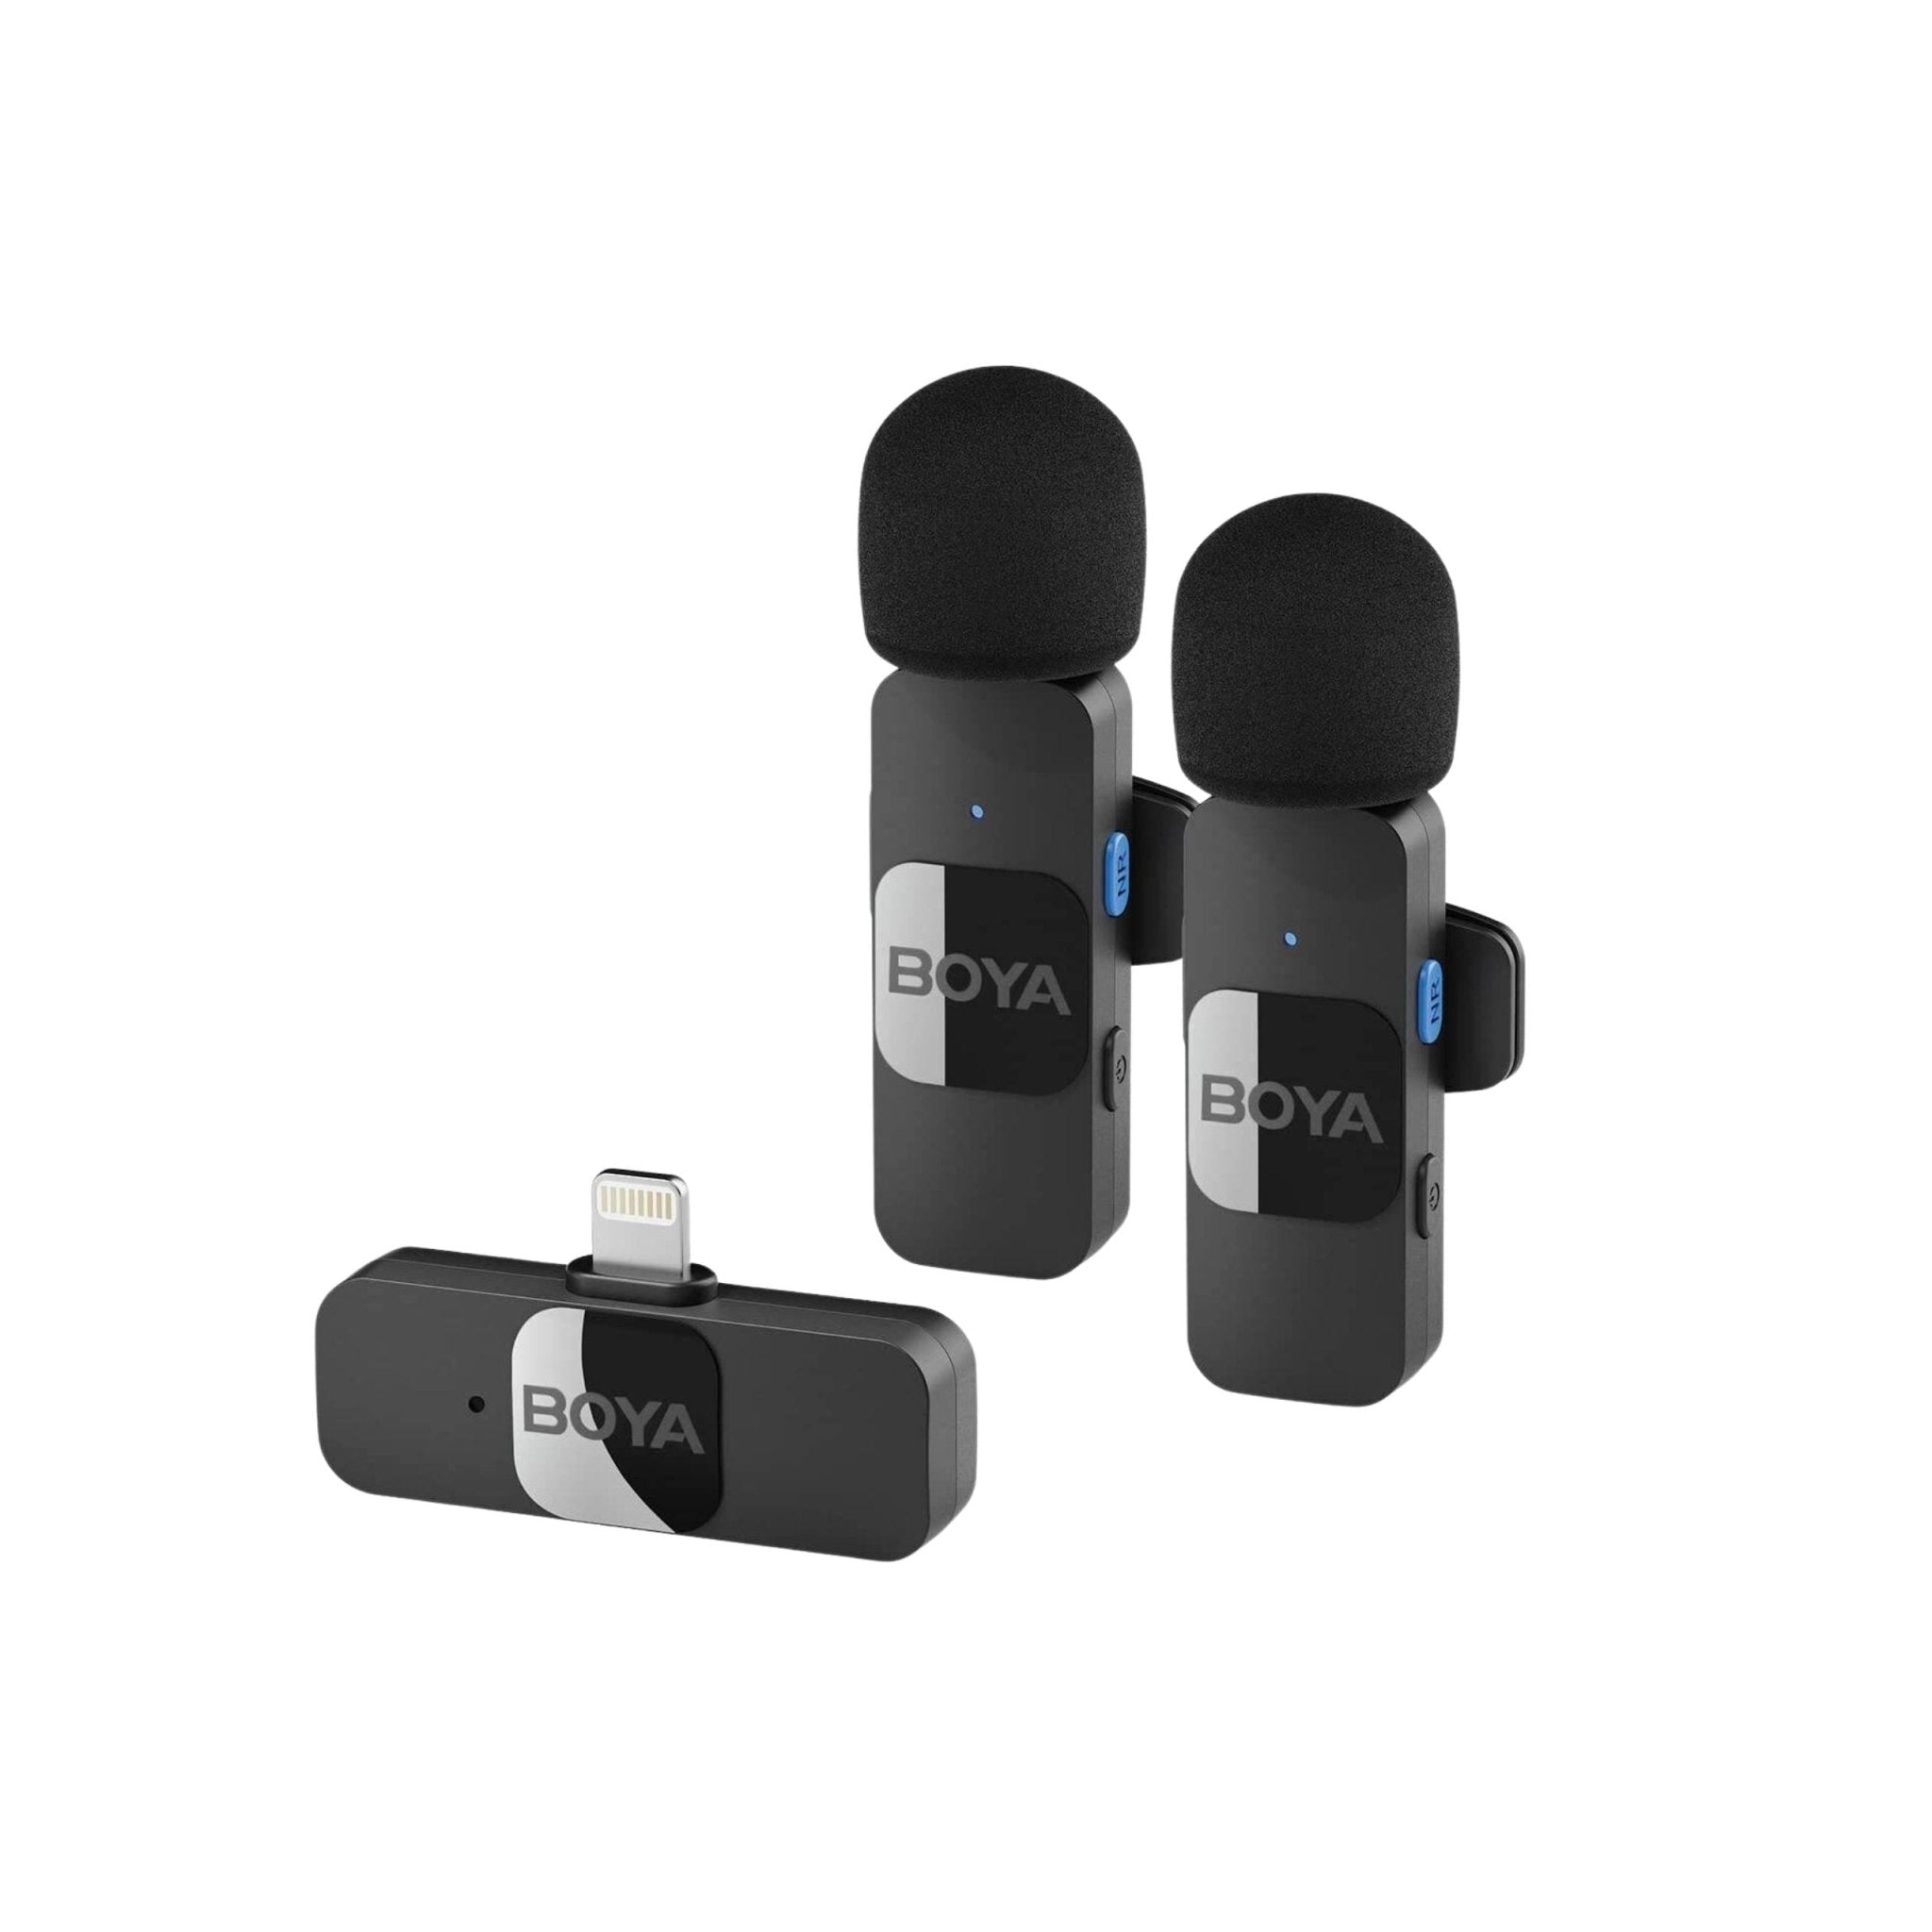 BOYA Ultracompact 2.4GHz Wireless Microphone System For IOS BY-V2 - Black